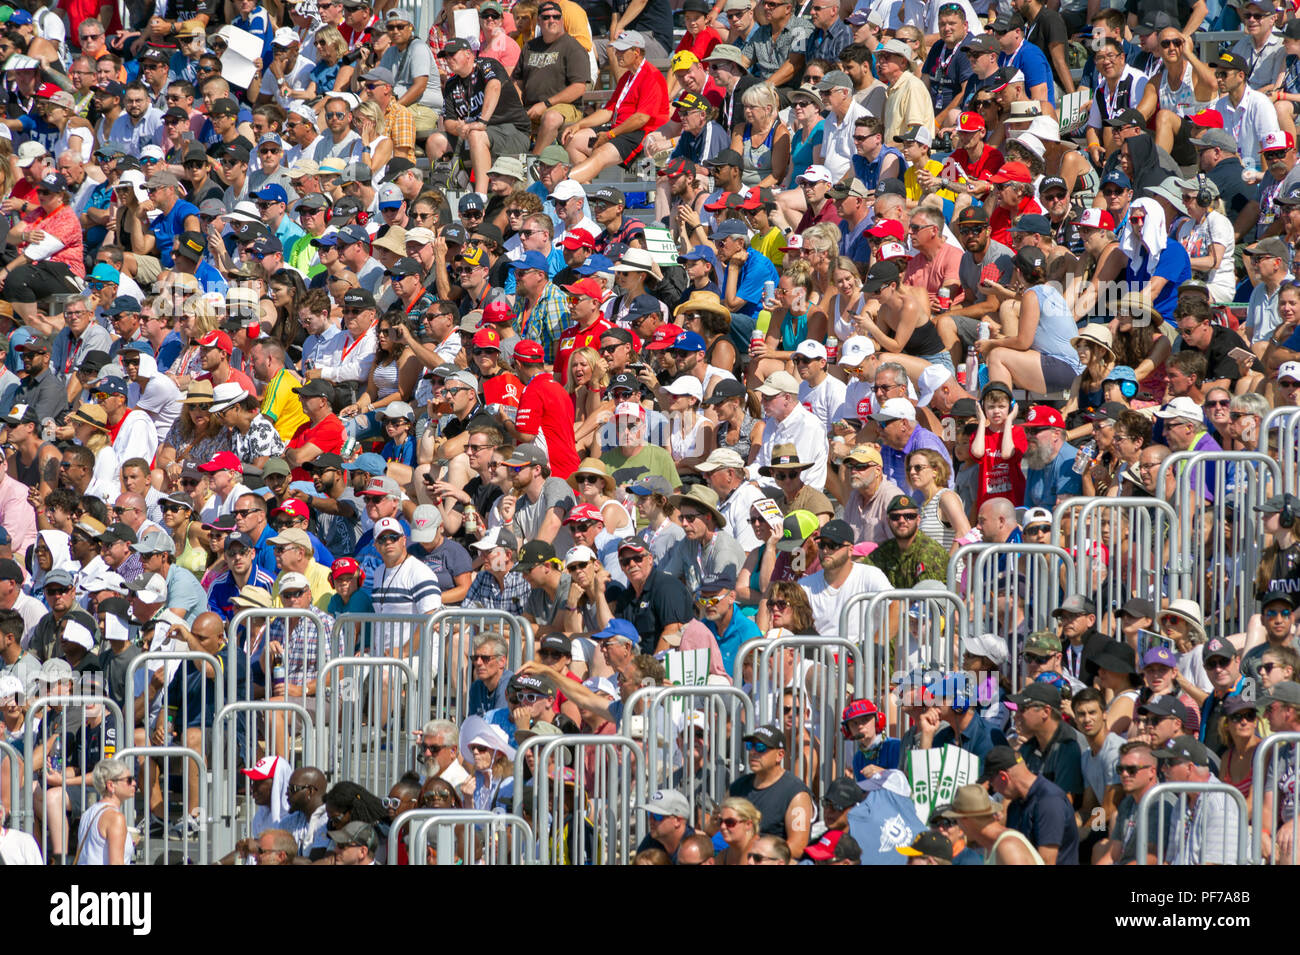 Indy Car Race Day in Toronto Stockfoto